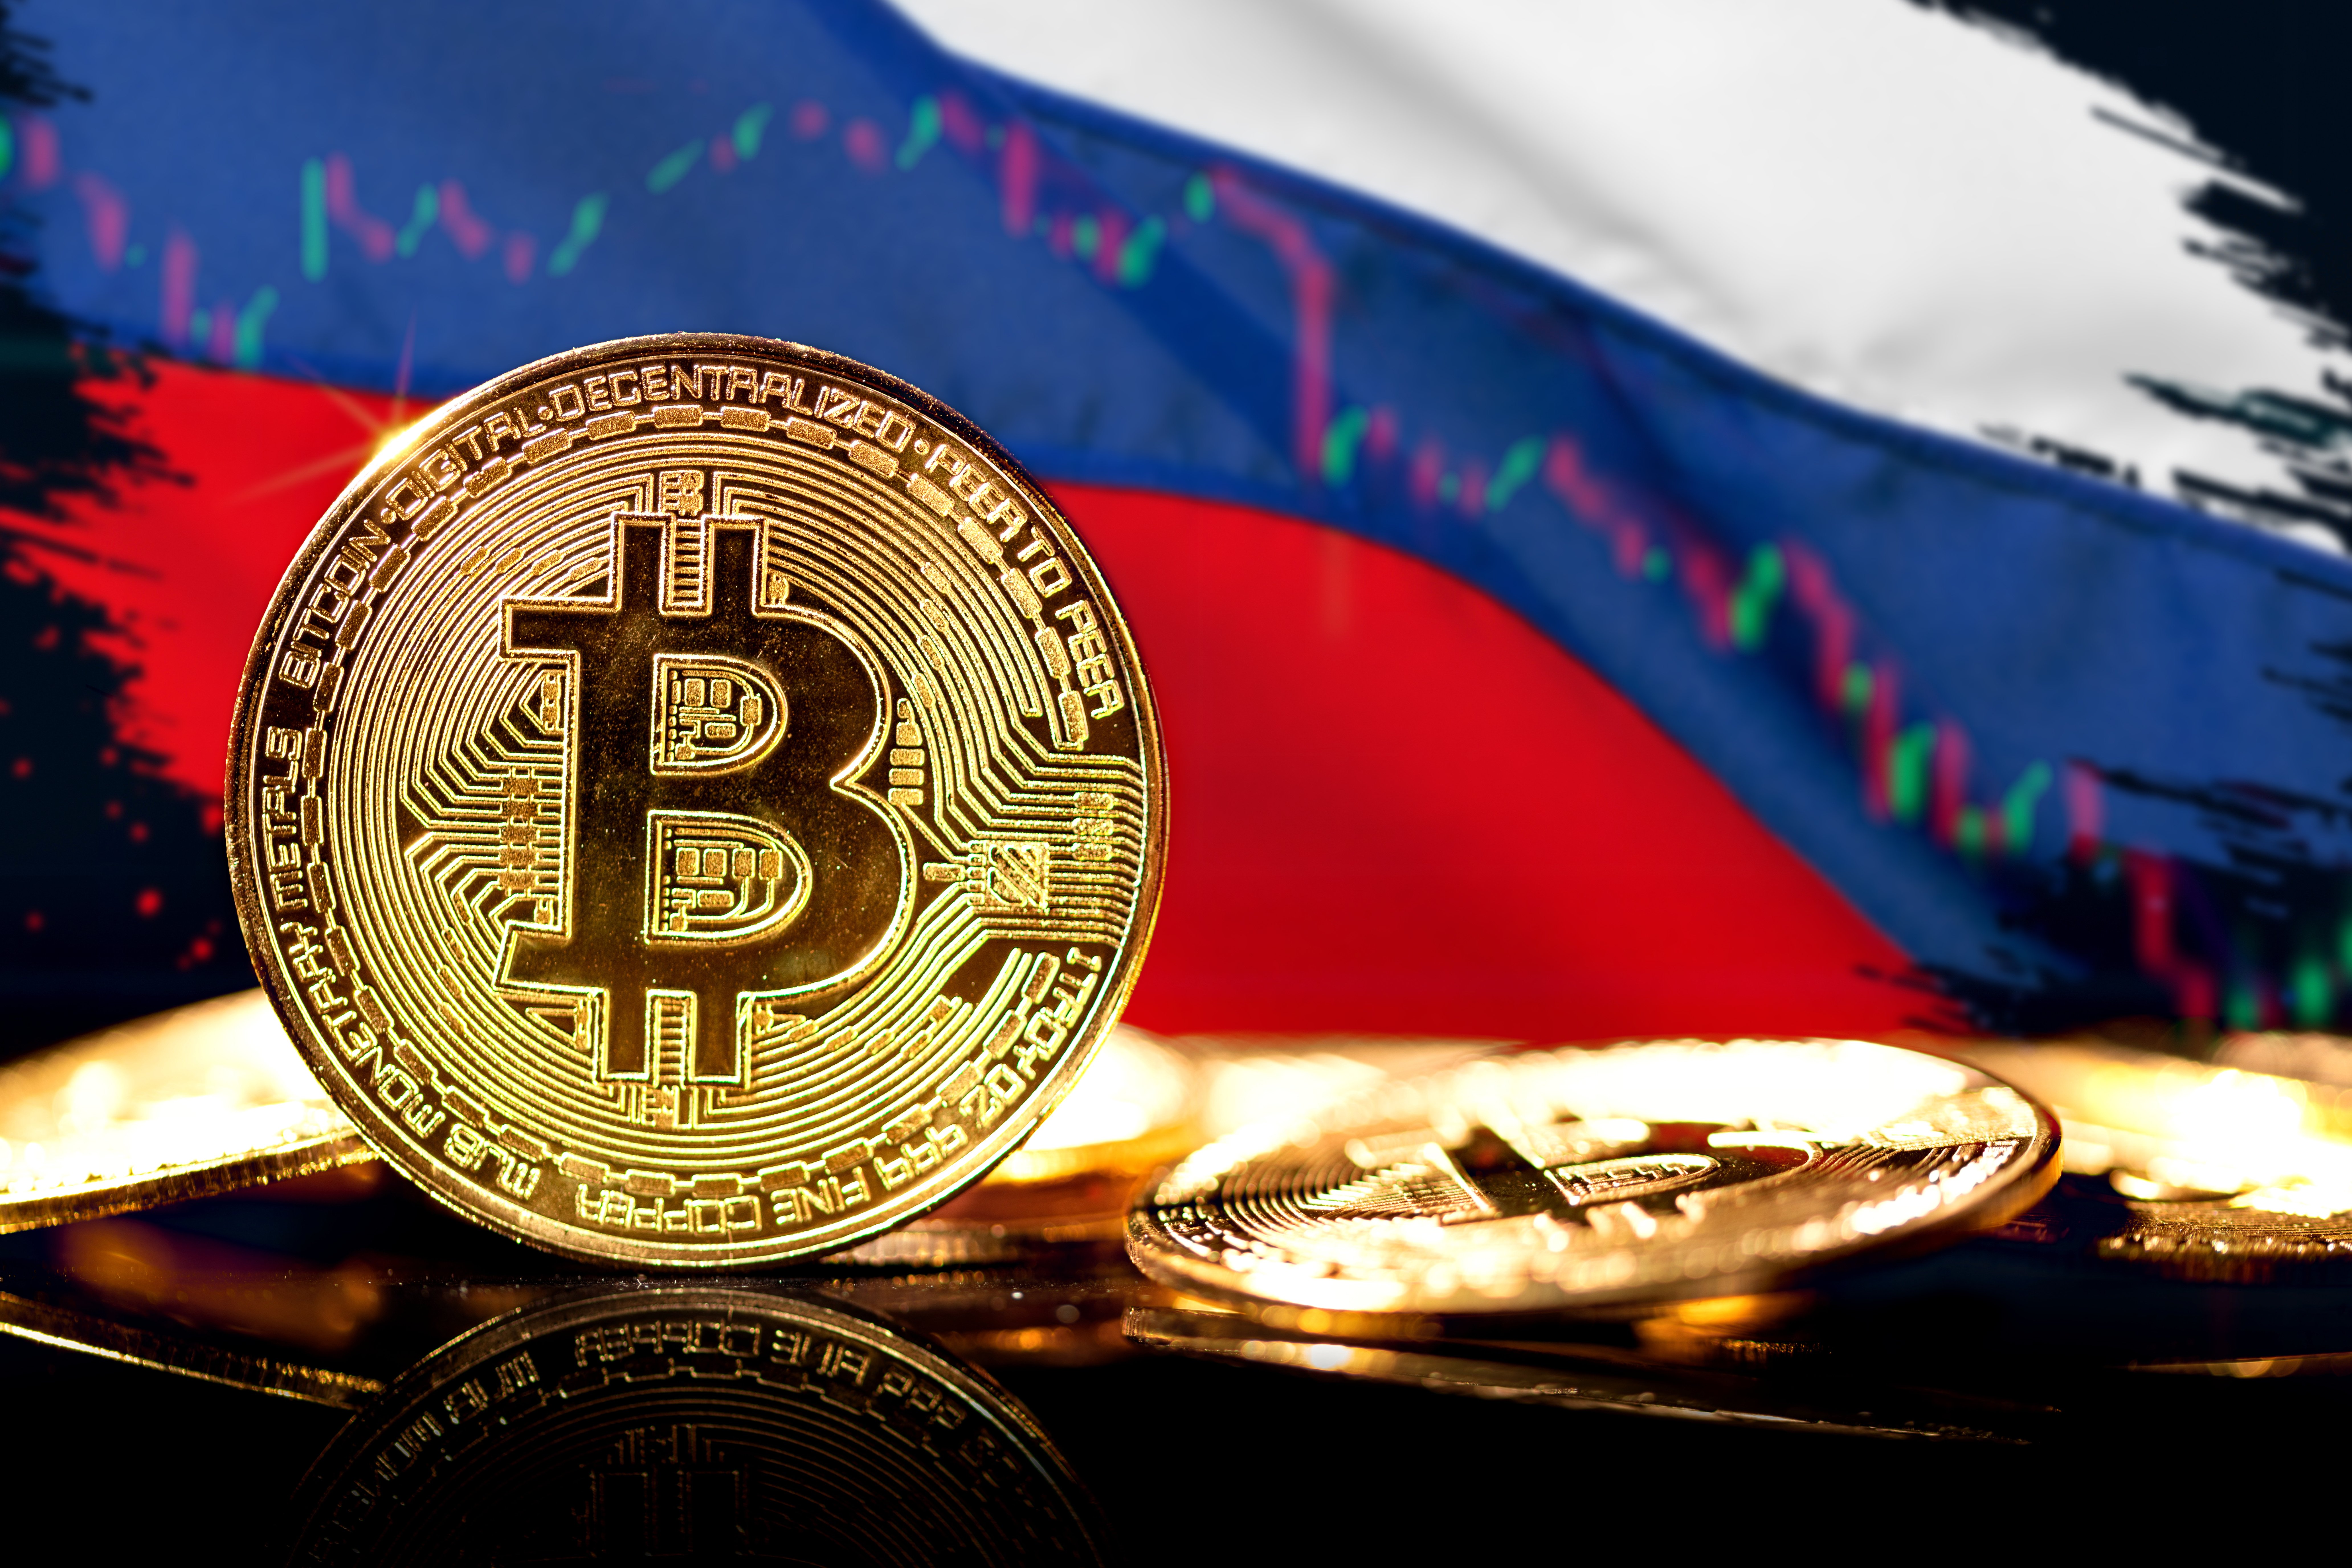 Russian Crypto Industry Group Calls for Putin Talks – This Is What It Wants to Discuss